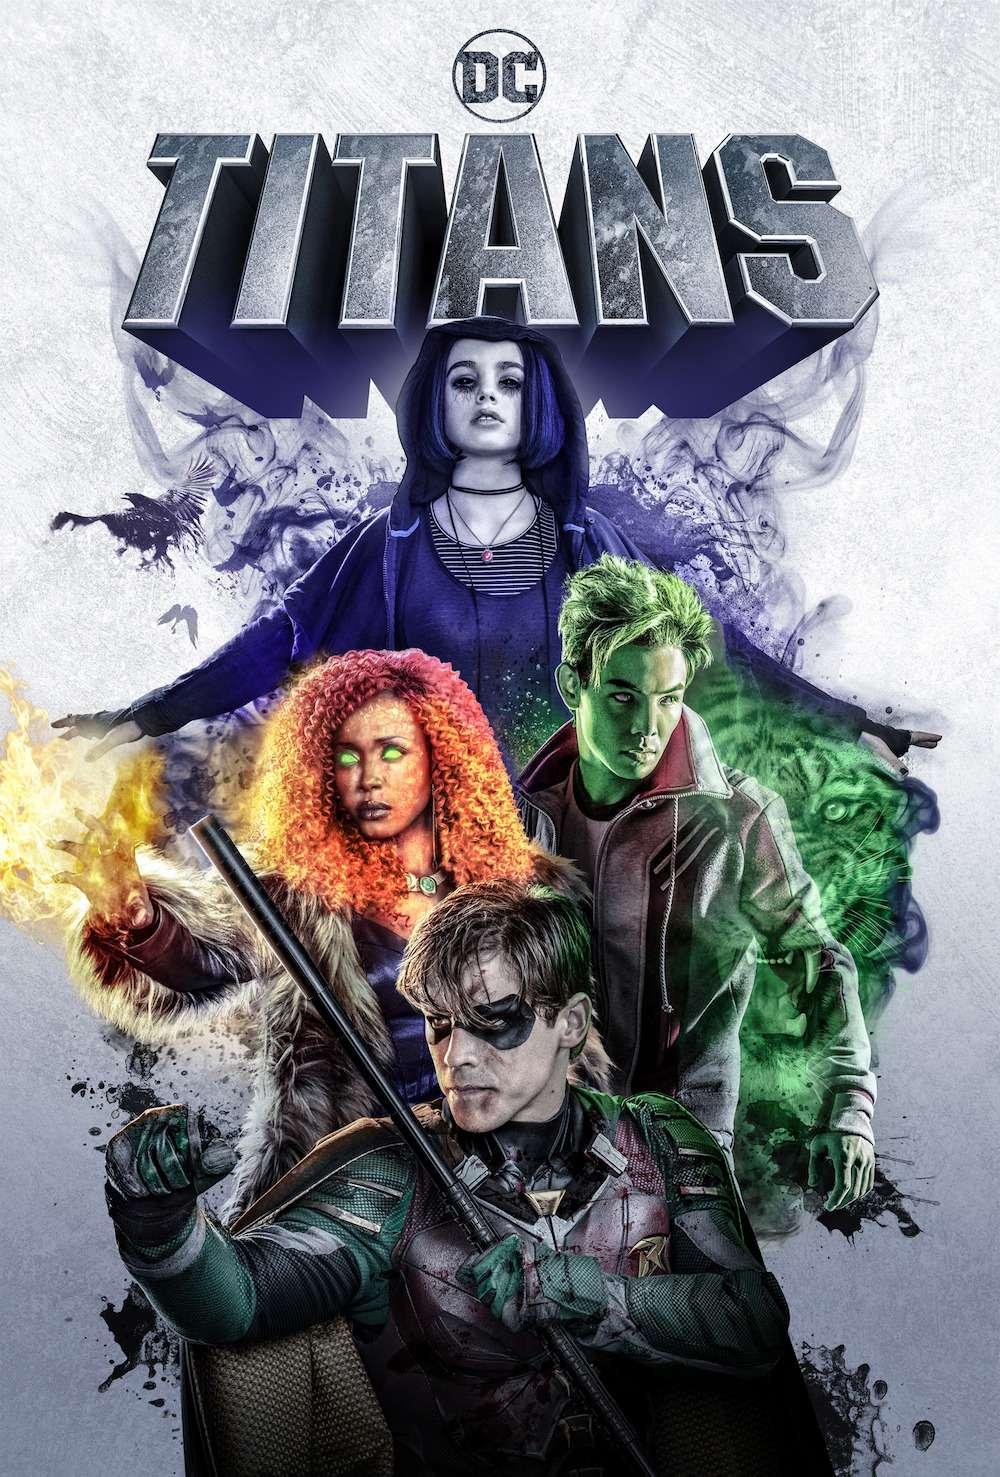 S1 US Poster